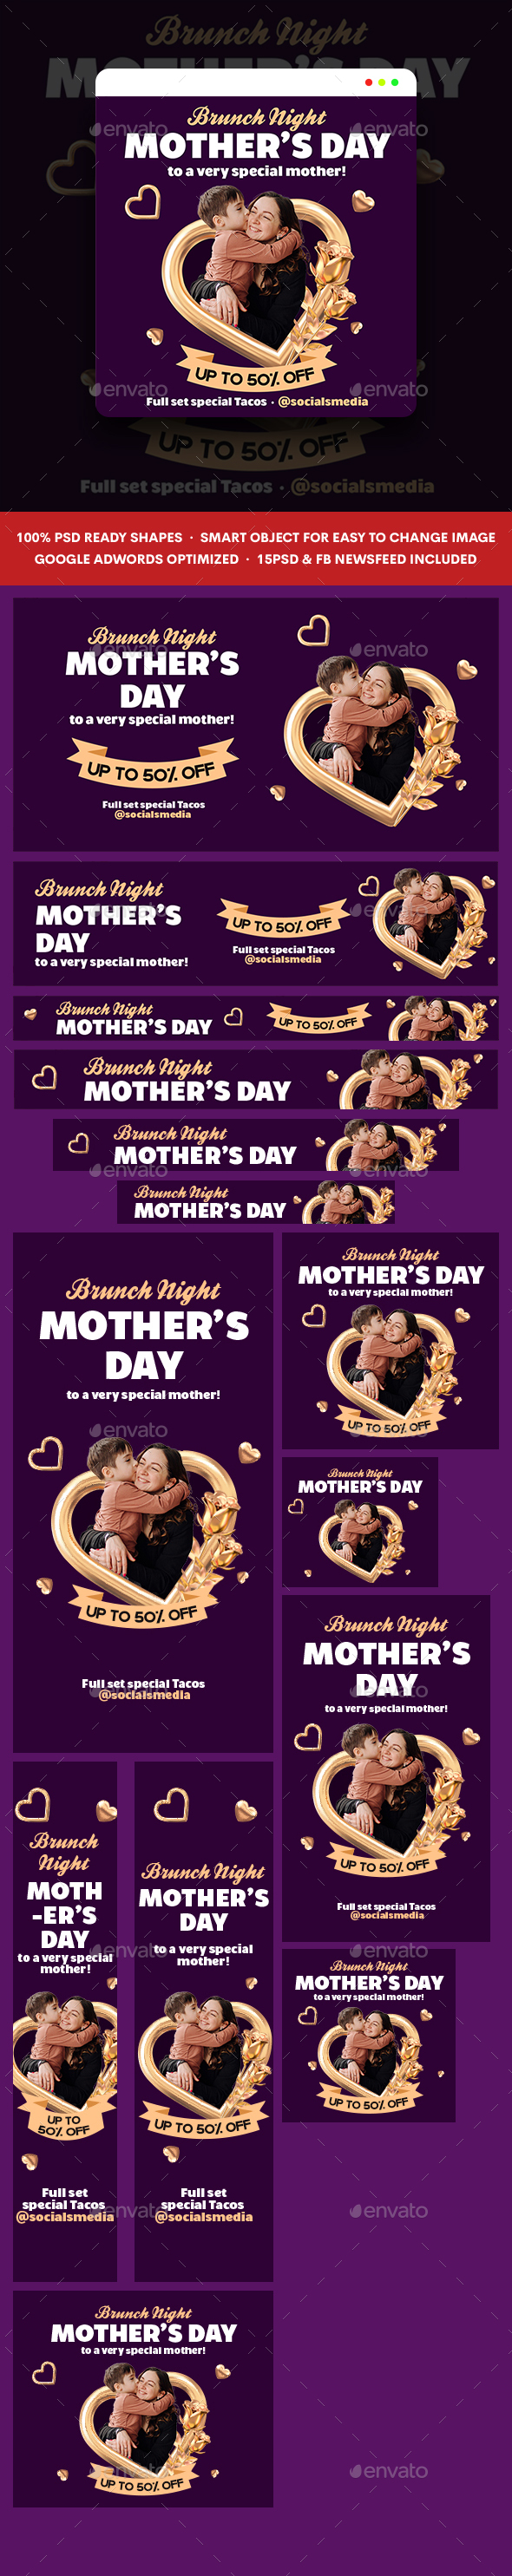 [DOWNLOAD]Happy Mothers Day Banners Ad